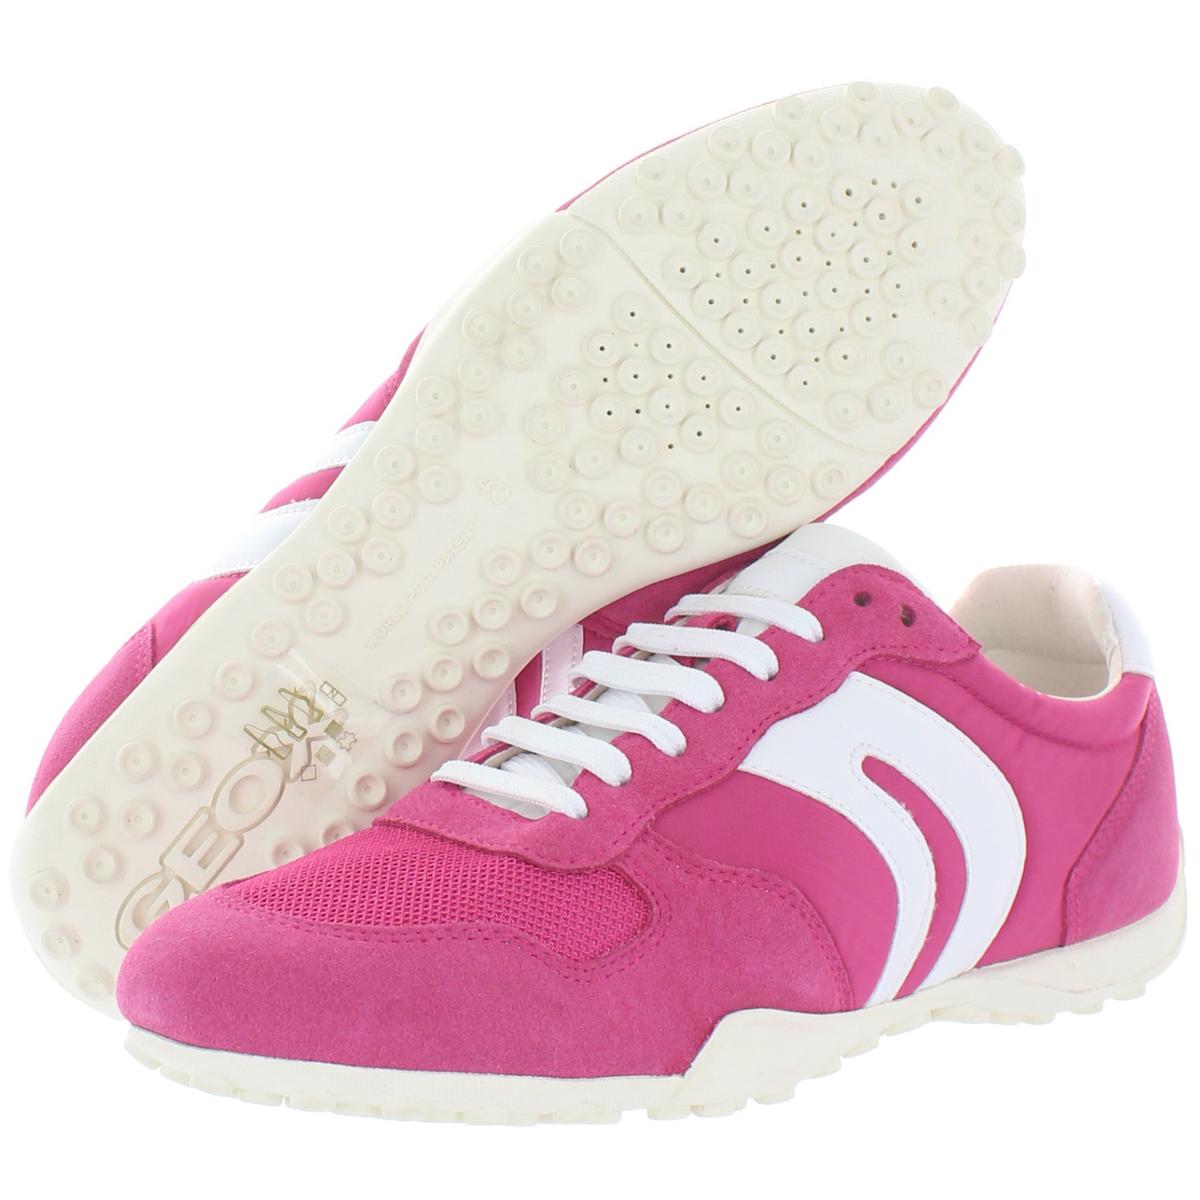 Geox Respira Womens Snake Trainers Suede Breathable Sneakers Shoes BHFO ...